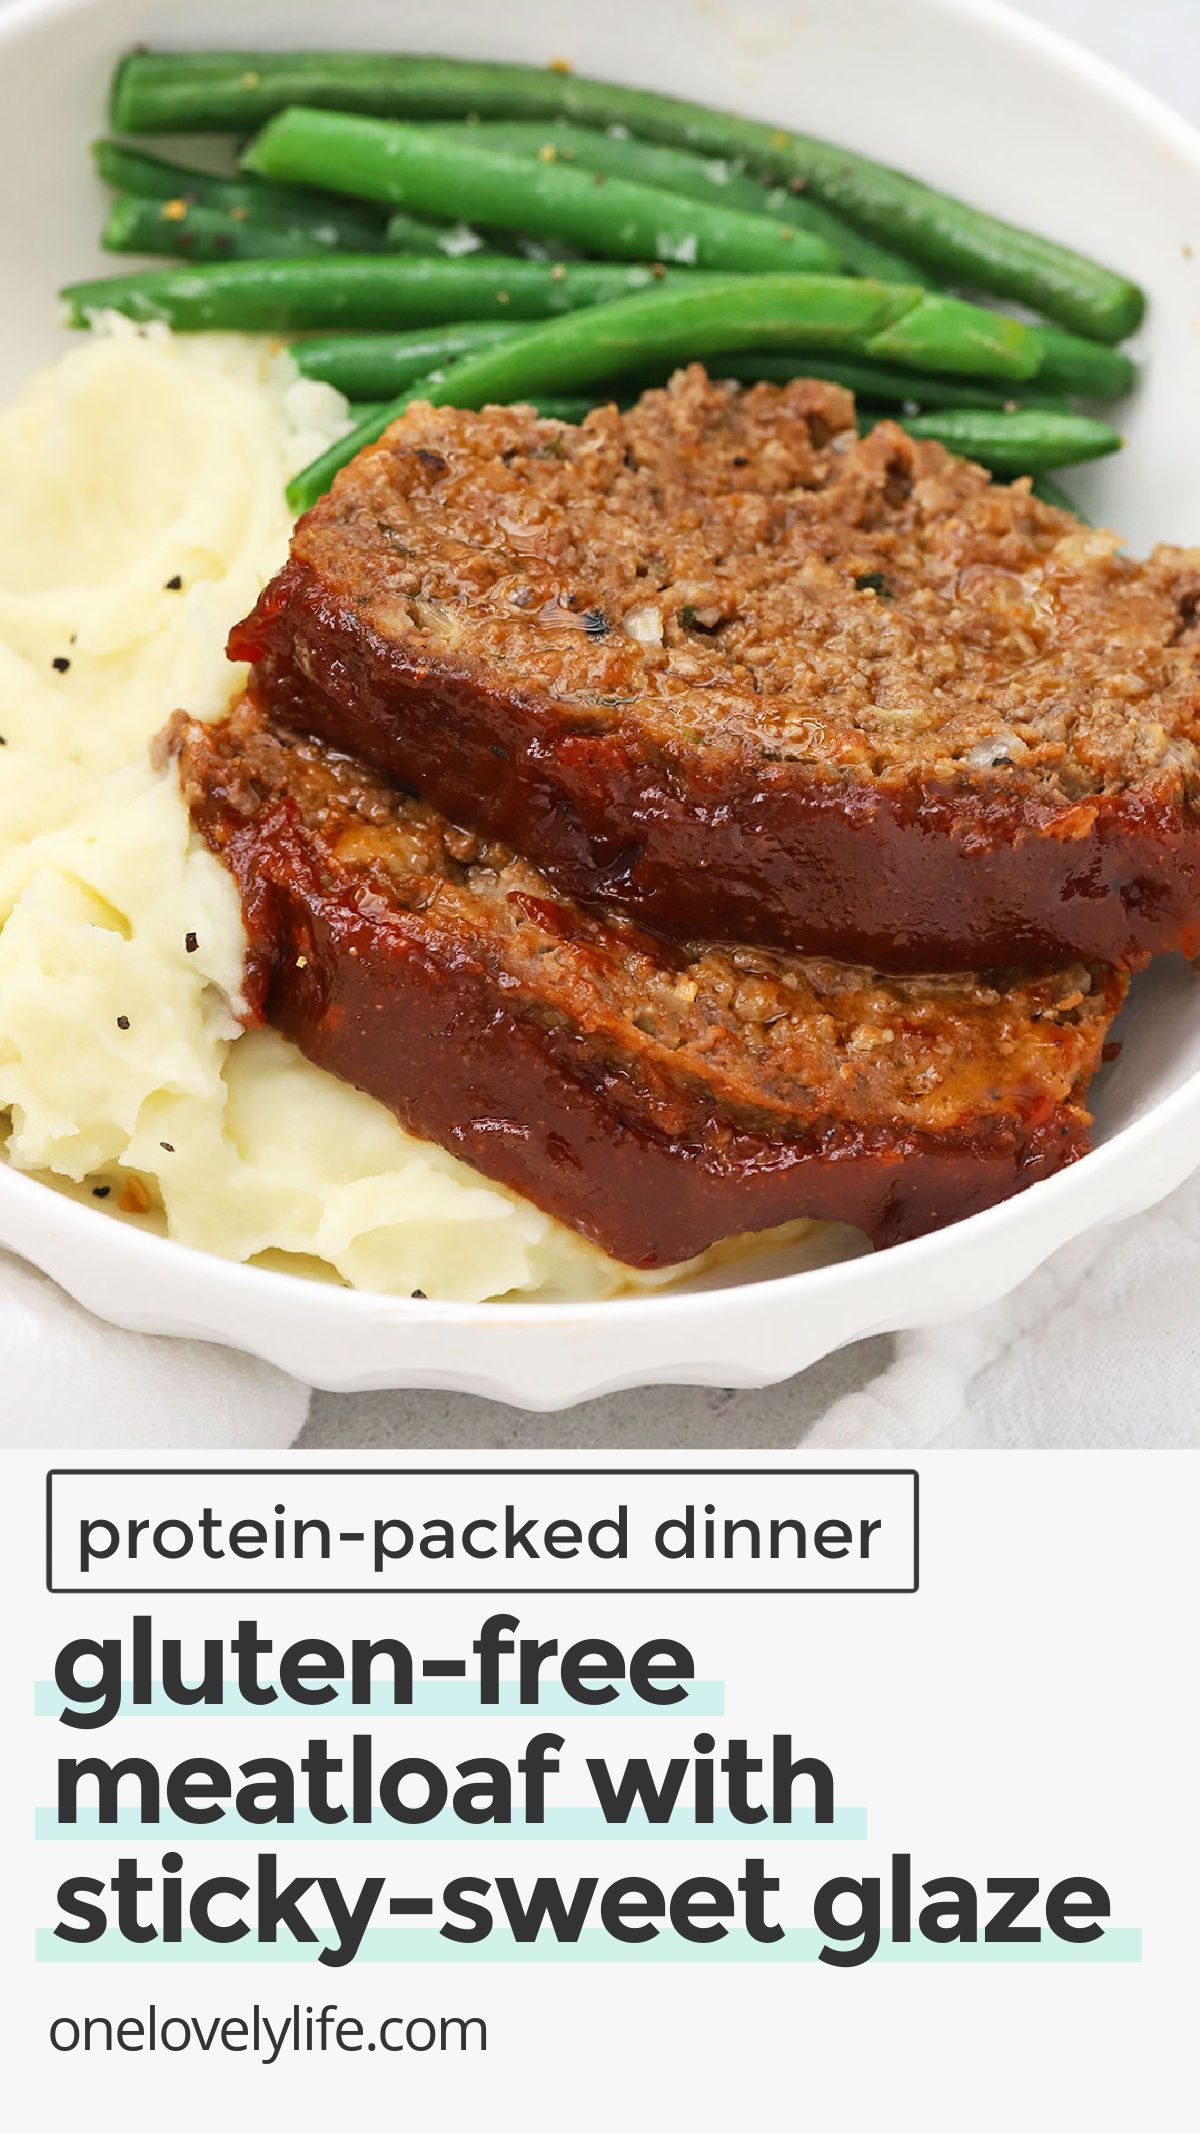 Our easy Gluten-Free Meatloaf recipe has tender texture, plenty of protein, and a yummy sticky sweet glaze that make it a classic! // classic gluten free meatloaf / healthy meatloaf / lean meatloaf / high protein dinner ideas / gluten free protein dinner / easy meatloaf glaze / the best meatloaf glaze / meatloaf glaze recipe / thick meatloaf glaze / gluten free dinner / gluten free comfort food / gluten free meat and potatoes dinner